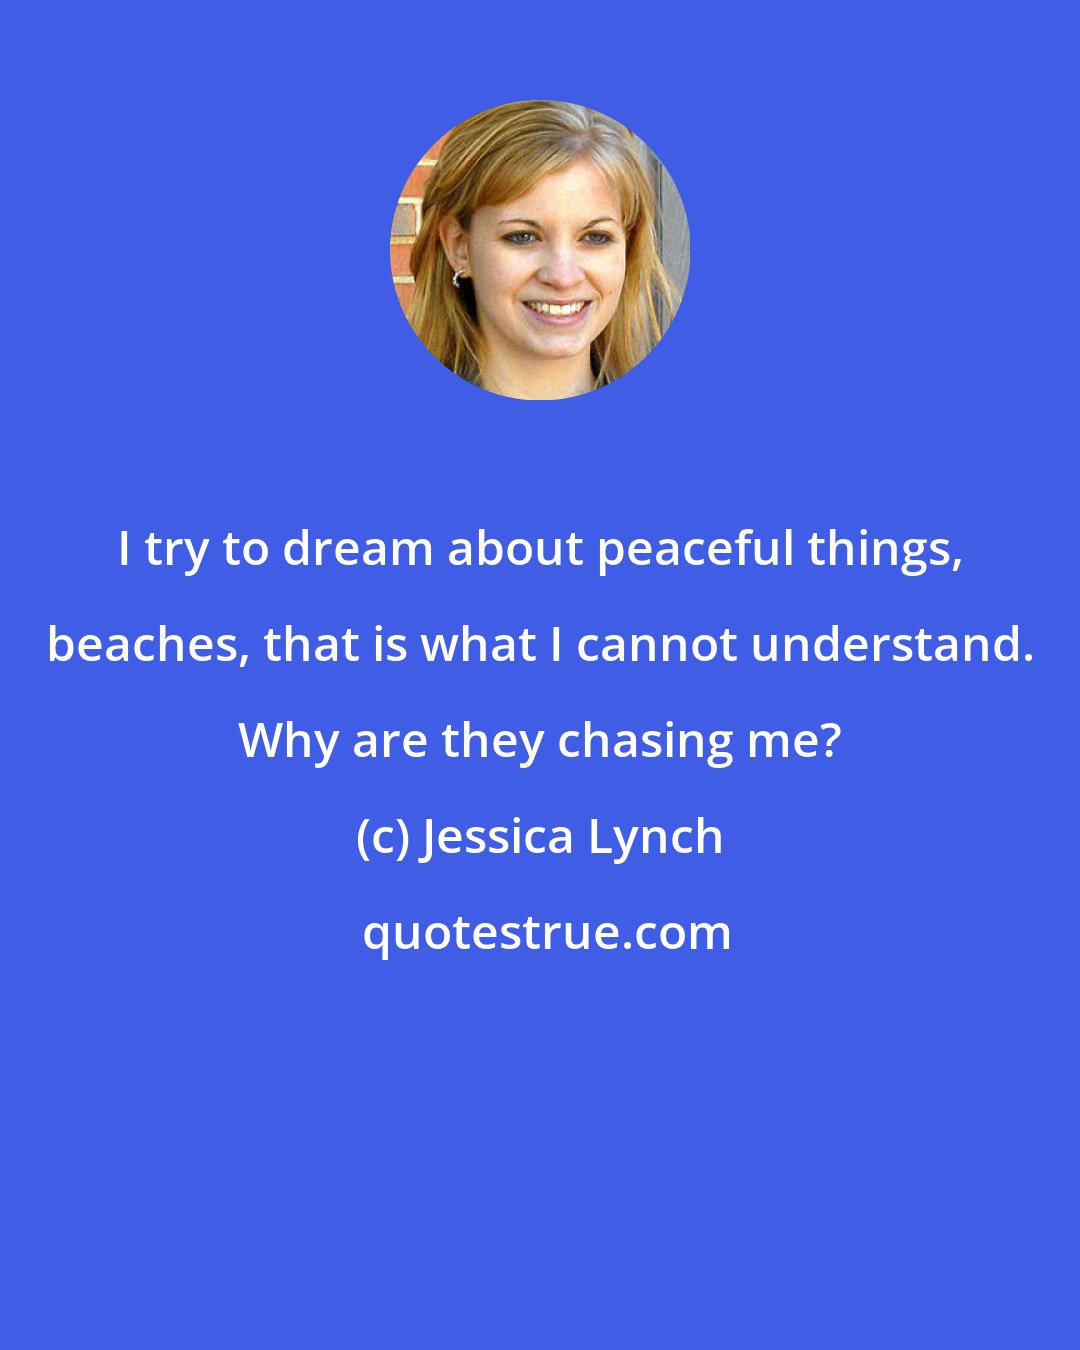 Jessica Lynch: I try to dream about peaceful things, beaches, that is what I cannot understand. Why are they chasing me?